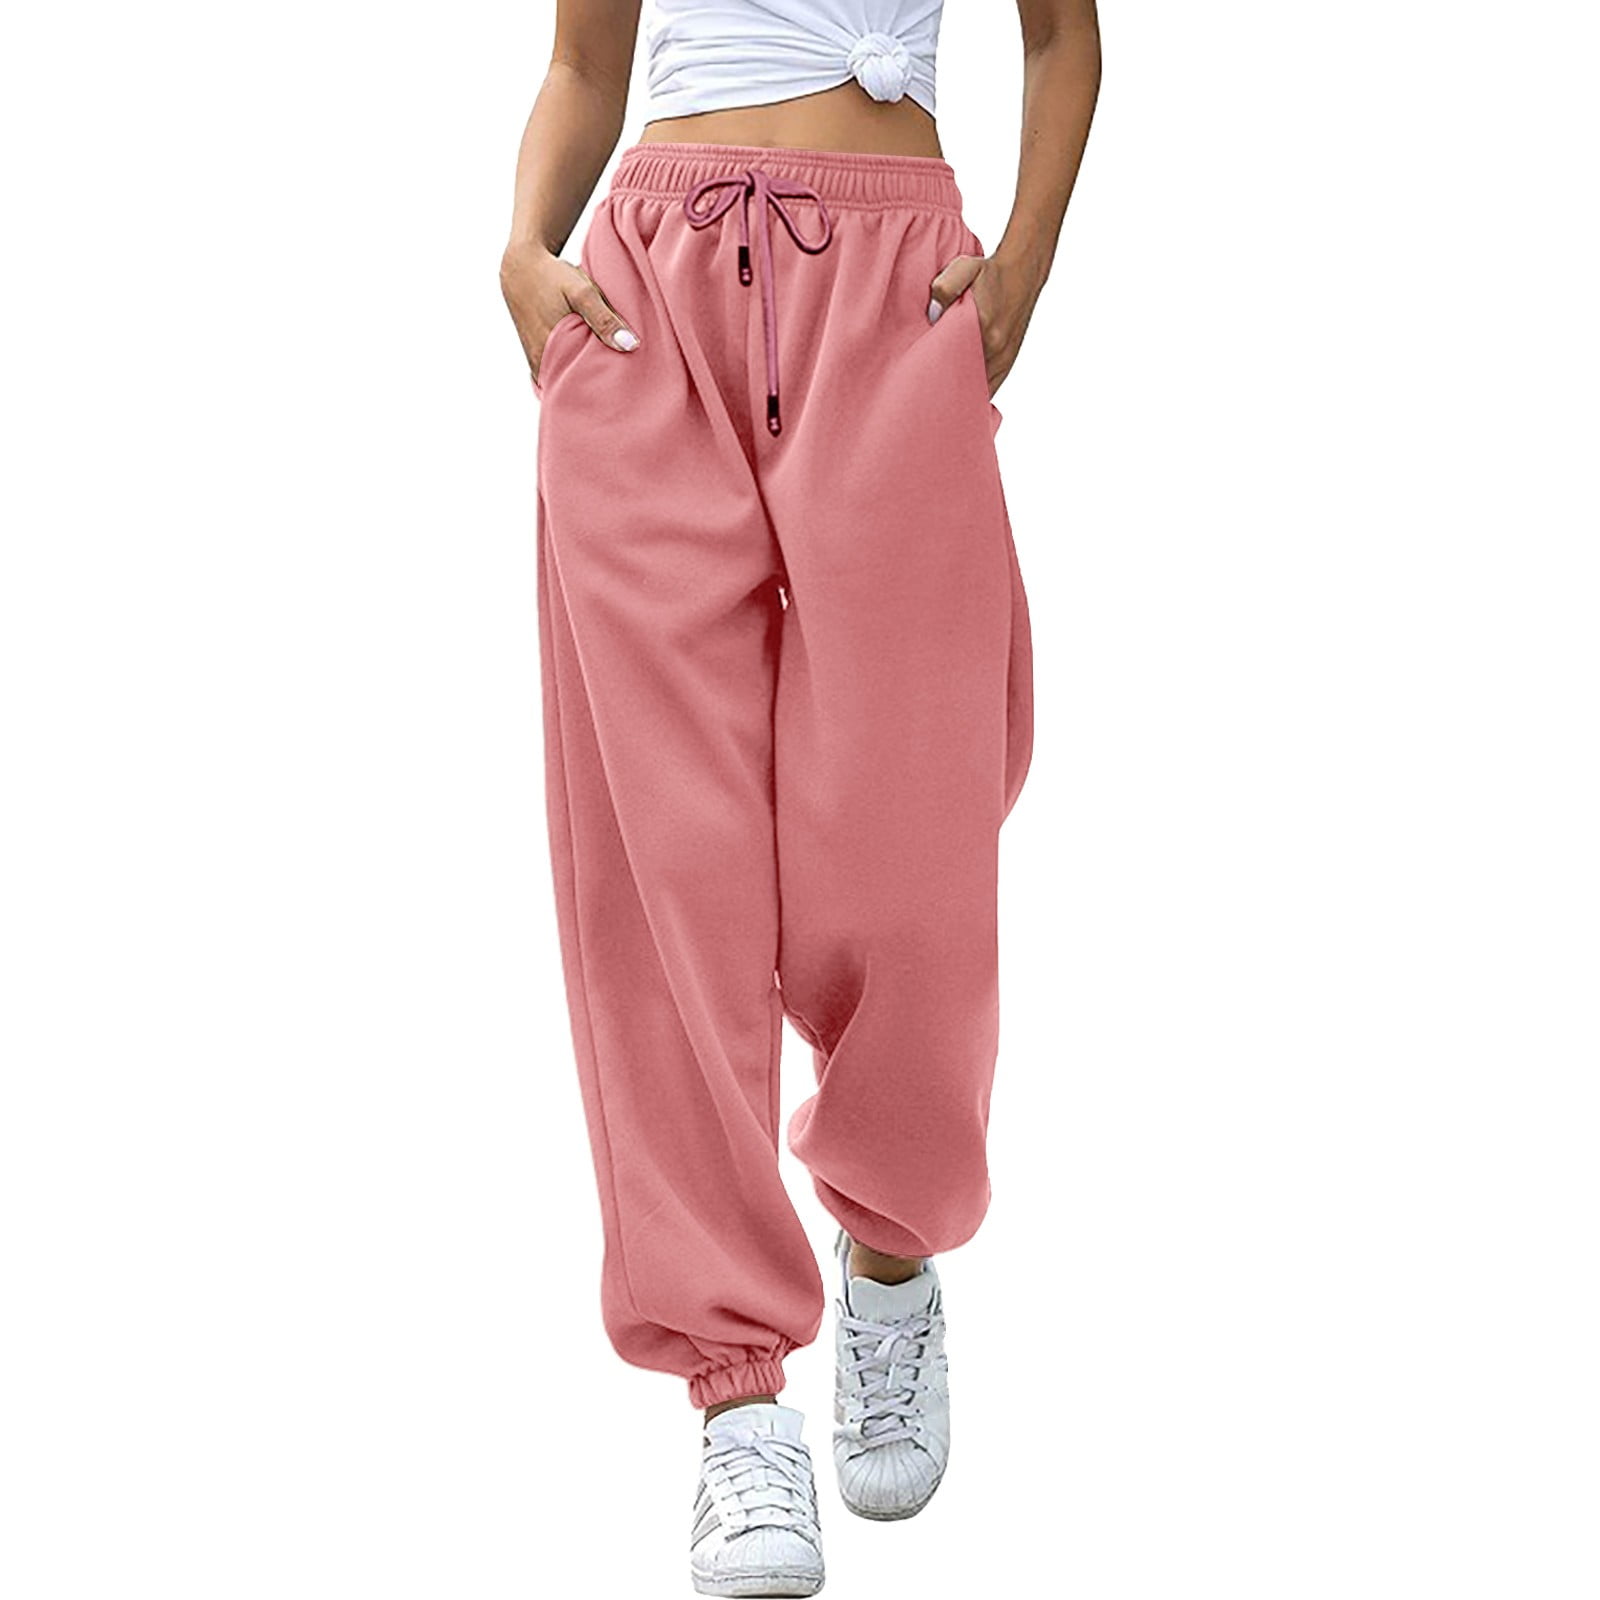  IGETELY Women's High Waisted Sweatpants Fashion Printed Workout  Active Joggers Pants Straight Leg Baggy Lounge Closed Bottoms Pink :  Clothing, Shoes & Jewelry